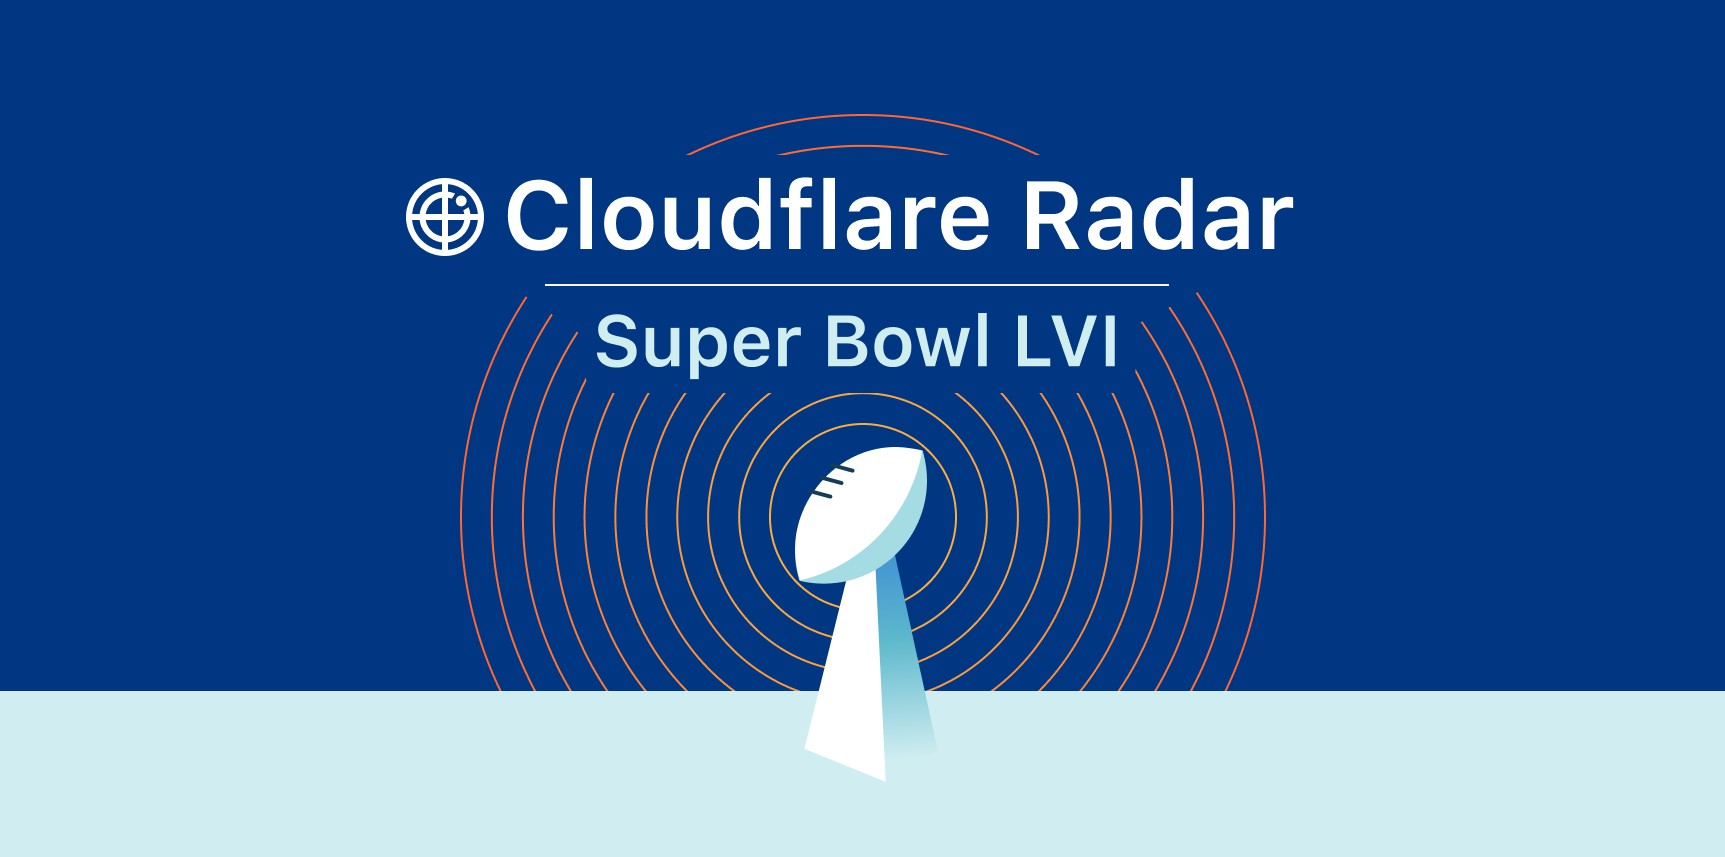 Who won Super Bowl LVI? A look at Internet traffic during the big game